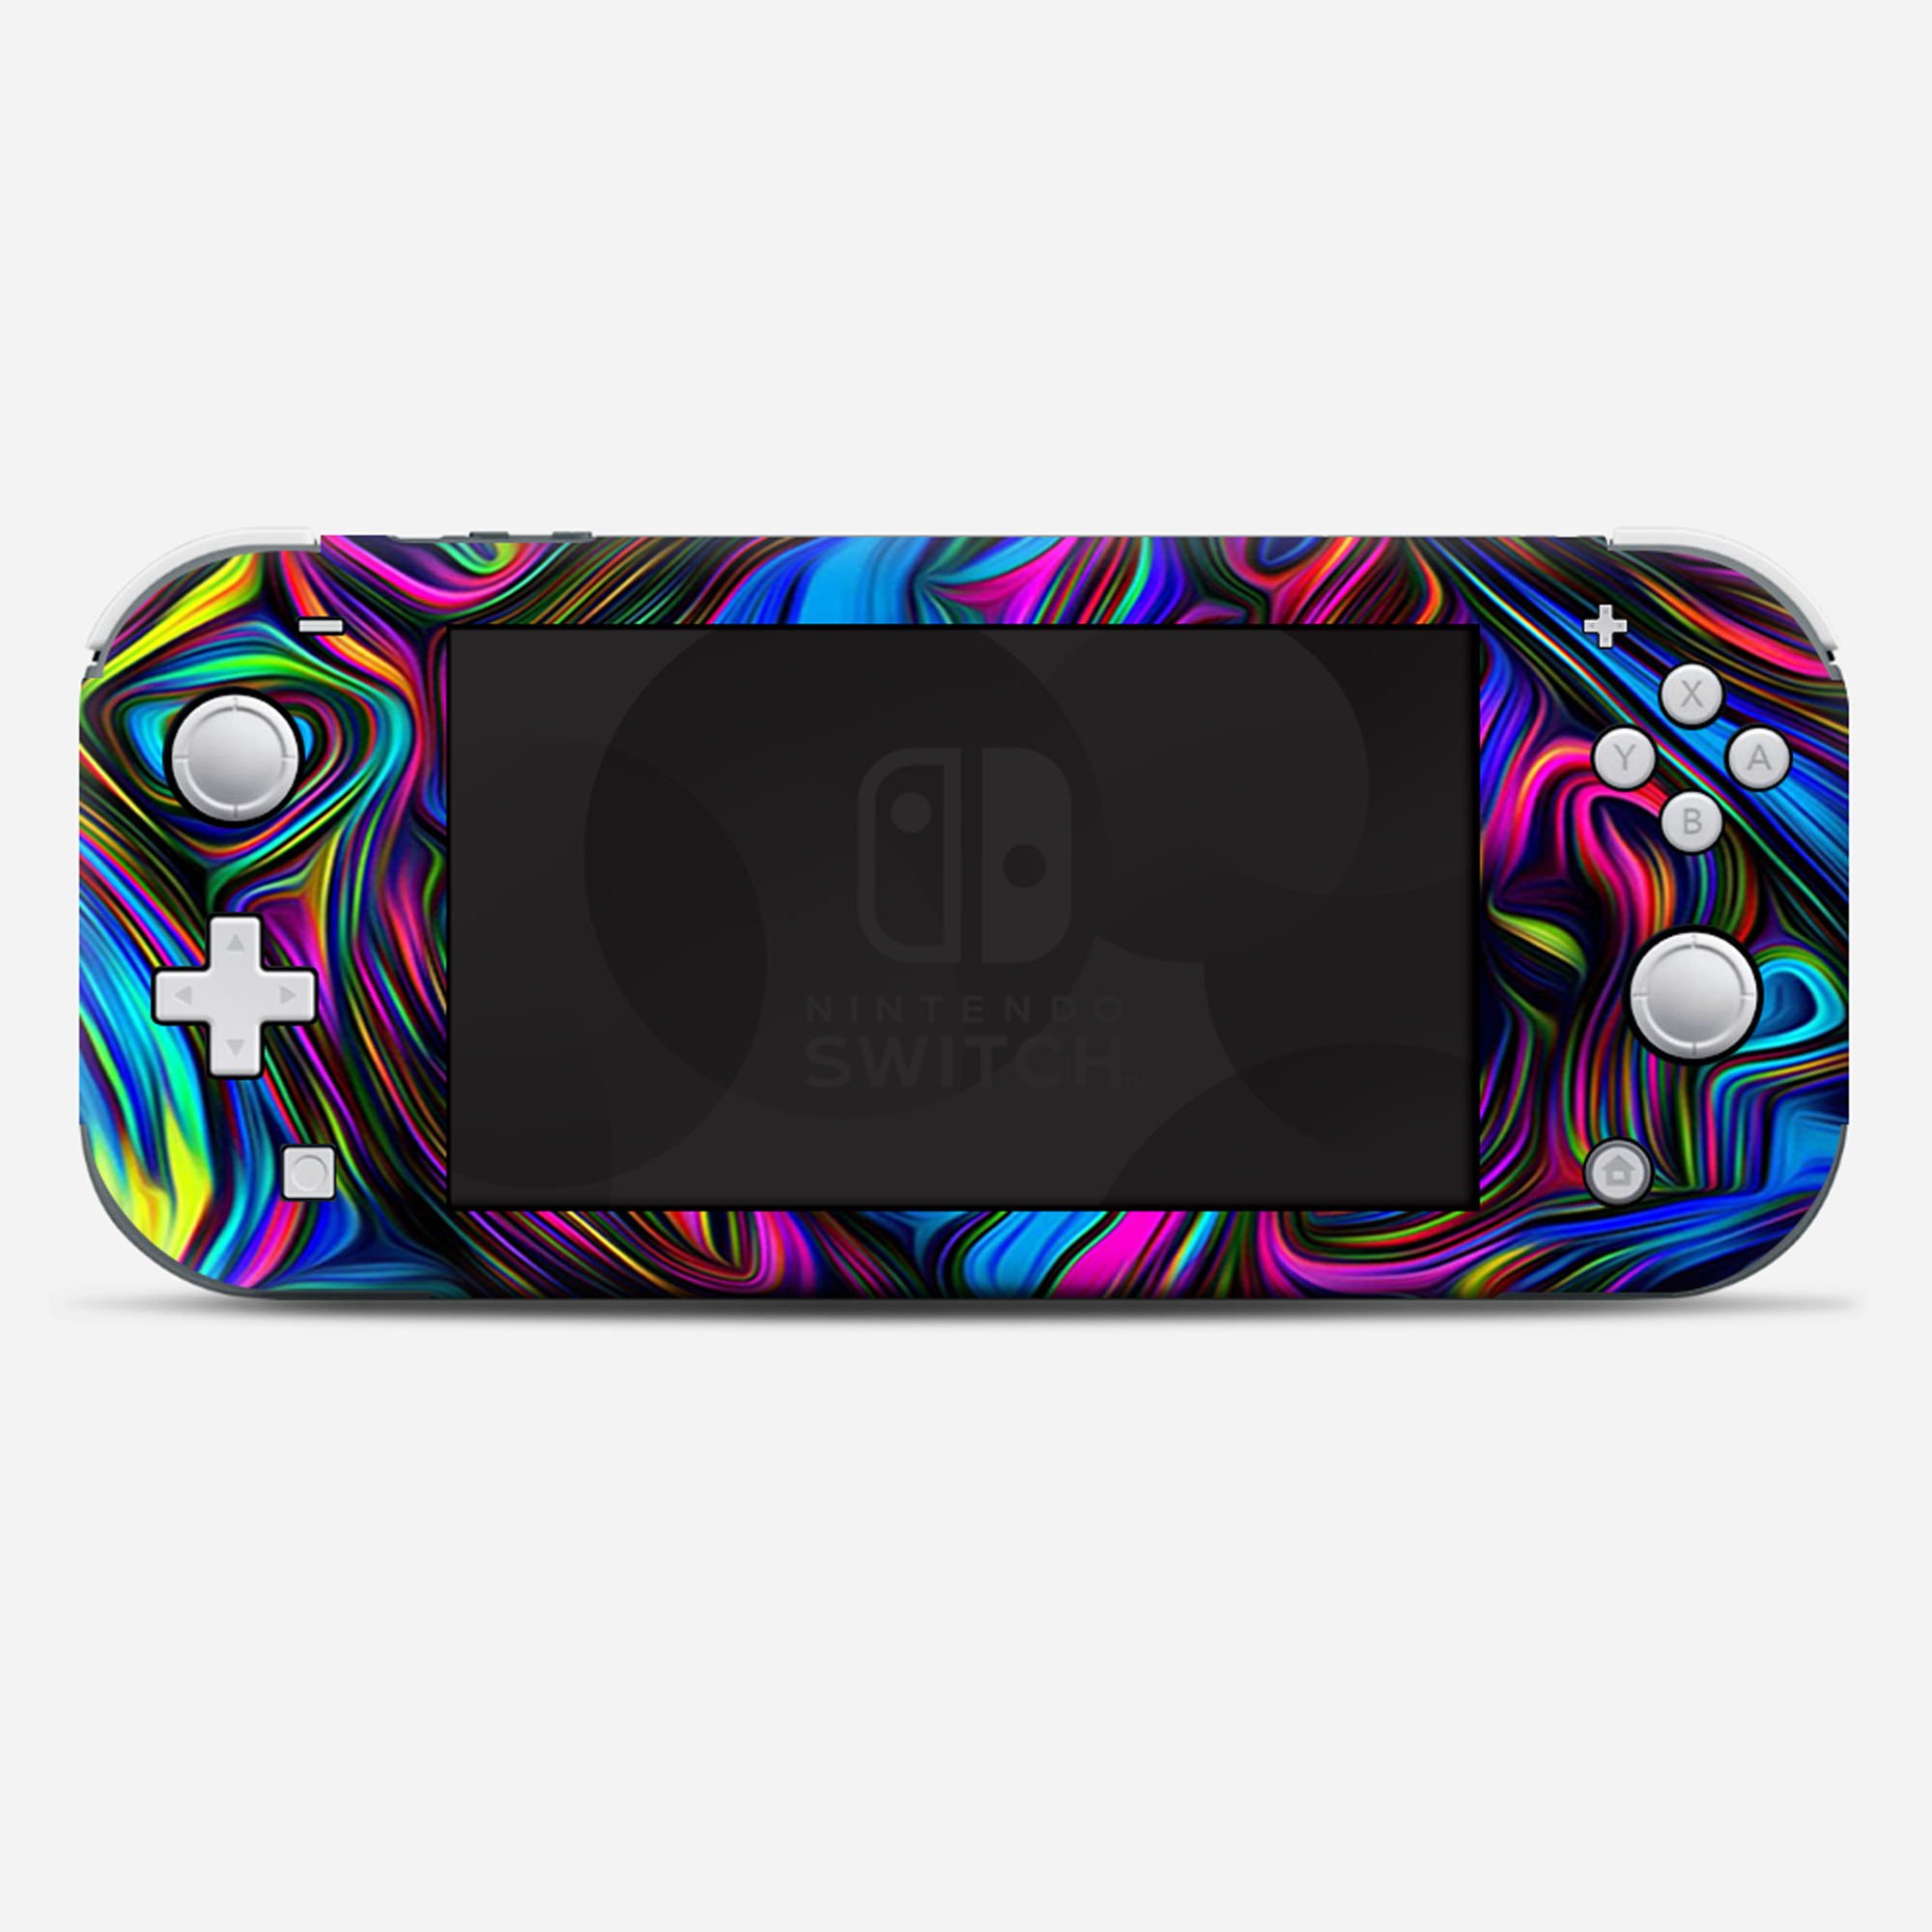 Nintendo Switch Lite Skins Decals Vinyl Wrap  - decal stickers skins cover -Neon Color Swirl Glass - image 2 of 4